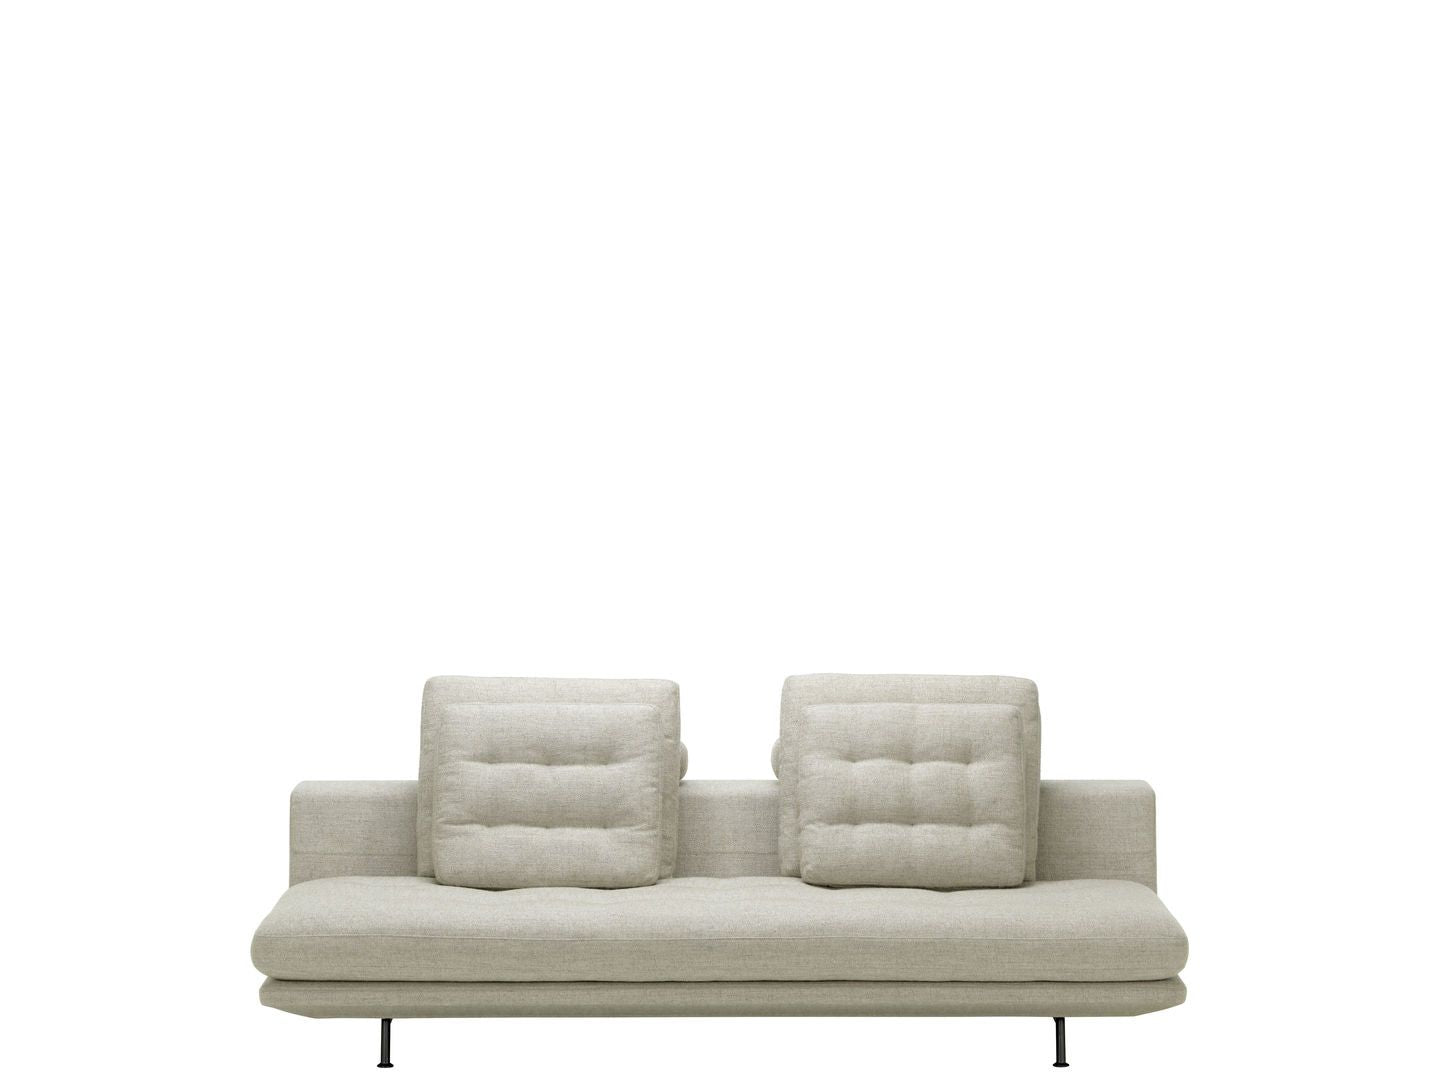  Vitra Grand Sofa 3-Seater - Luxurious and Comfortable Seating for Your Home from One52 Furniture